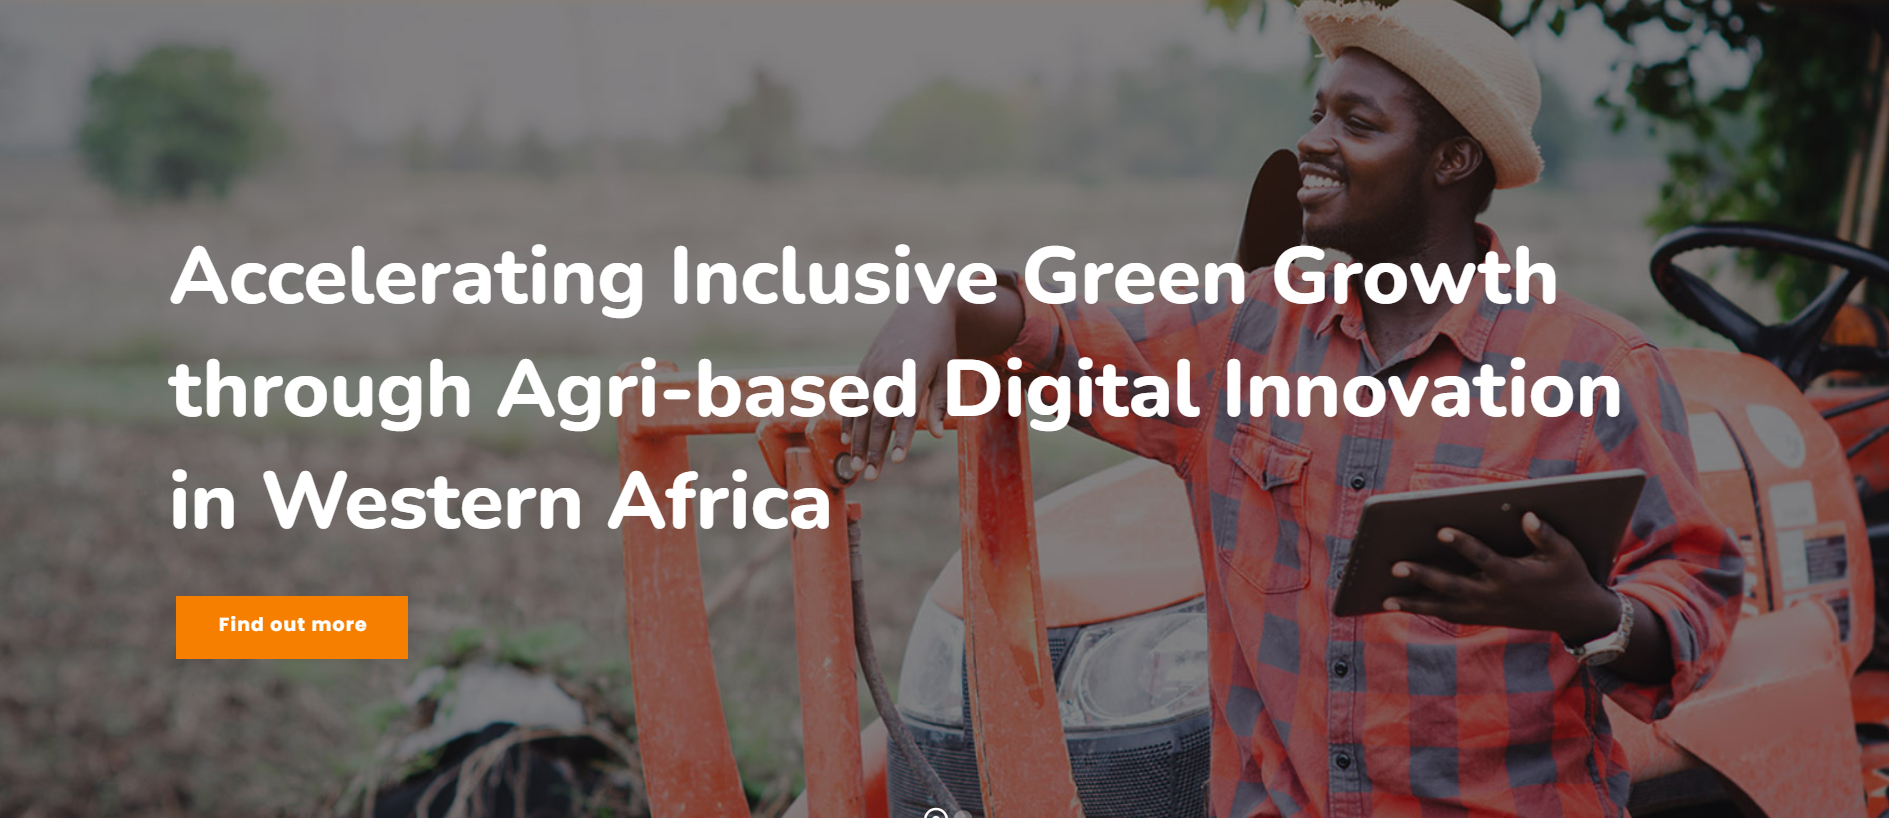 2nd Call for Proposals launched by AGriDI (Accelerating inclusive green growth through agri-based digital innovation in West Africa)